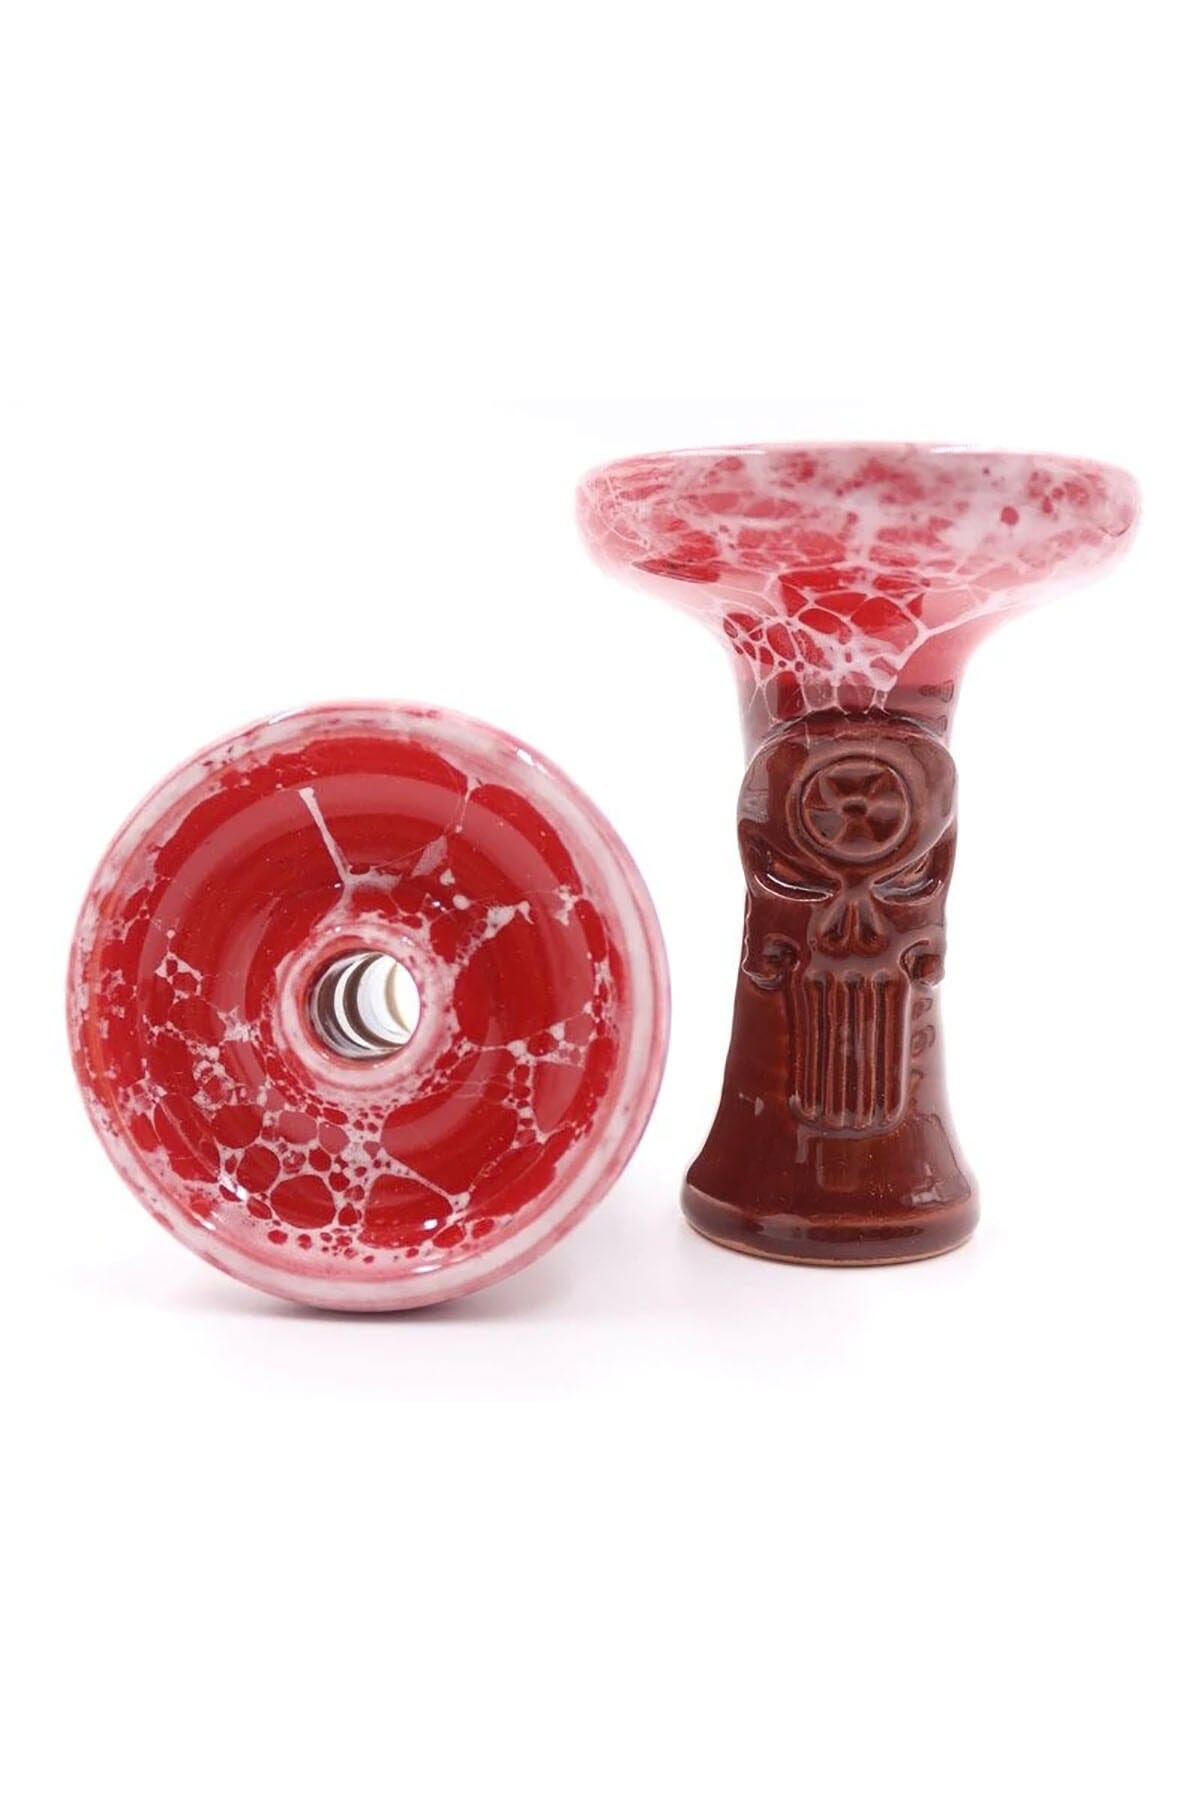 Alchimik Phunnel Punisher - Marble Red